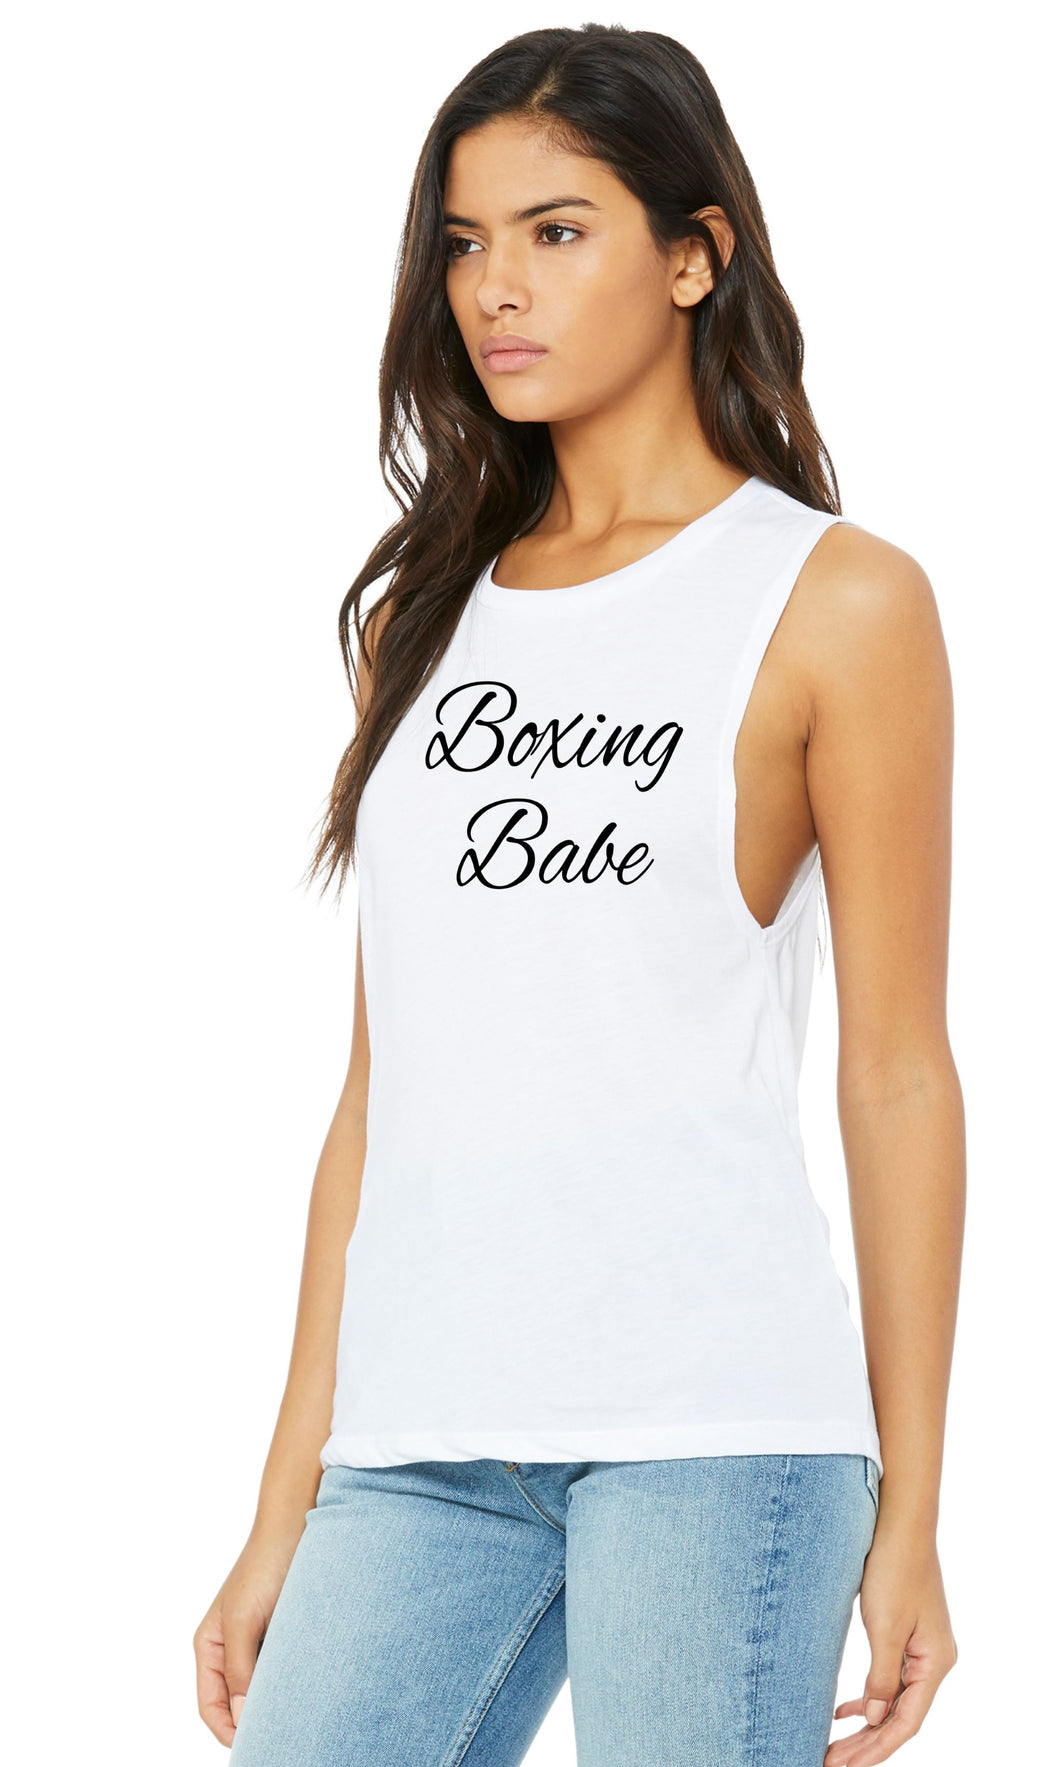 Boxing Babe Muscle Tank - Gym Babe Apparel